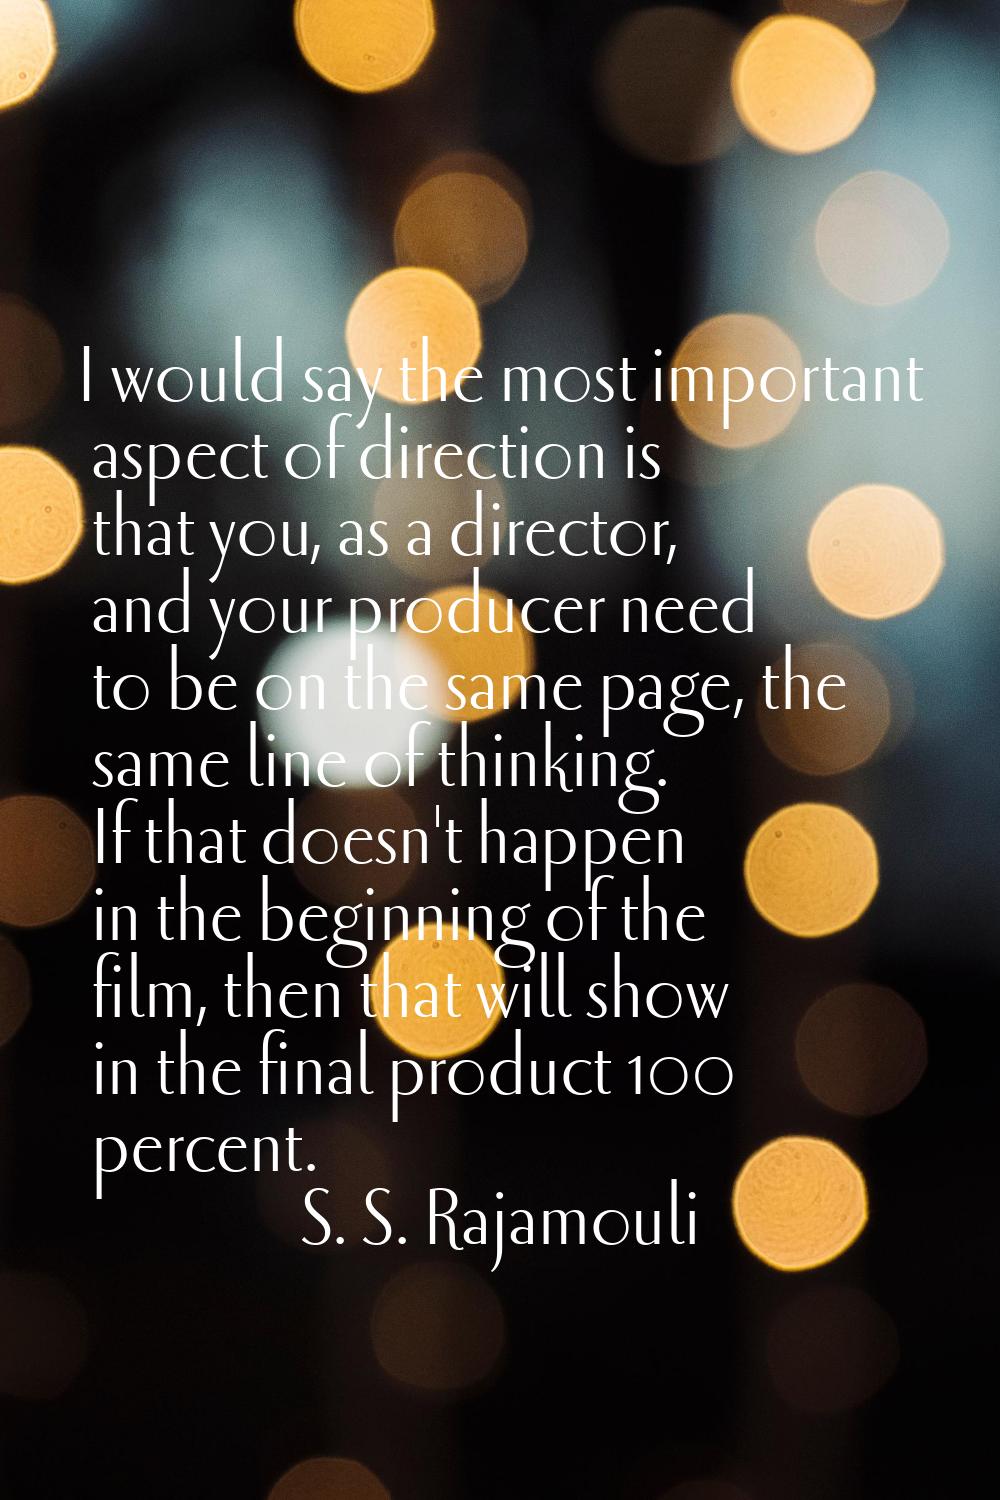 I would say the most important aspect of direction is that you, as a director, and your producer ne